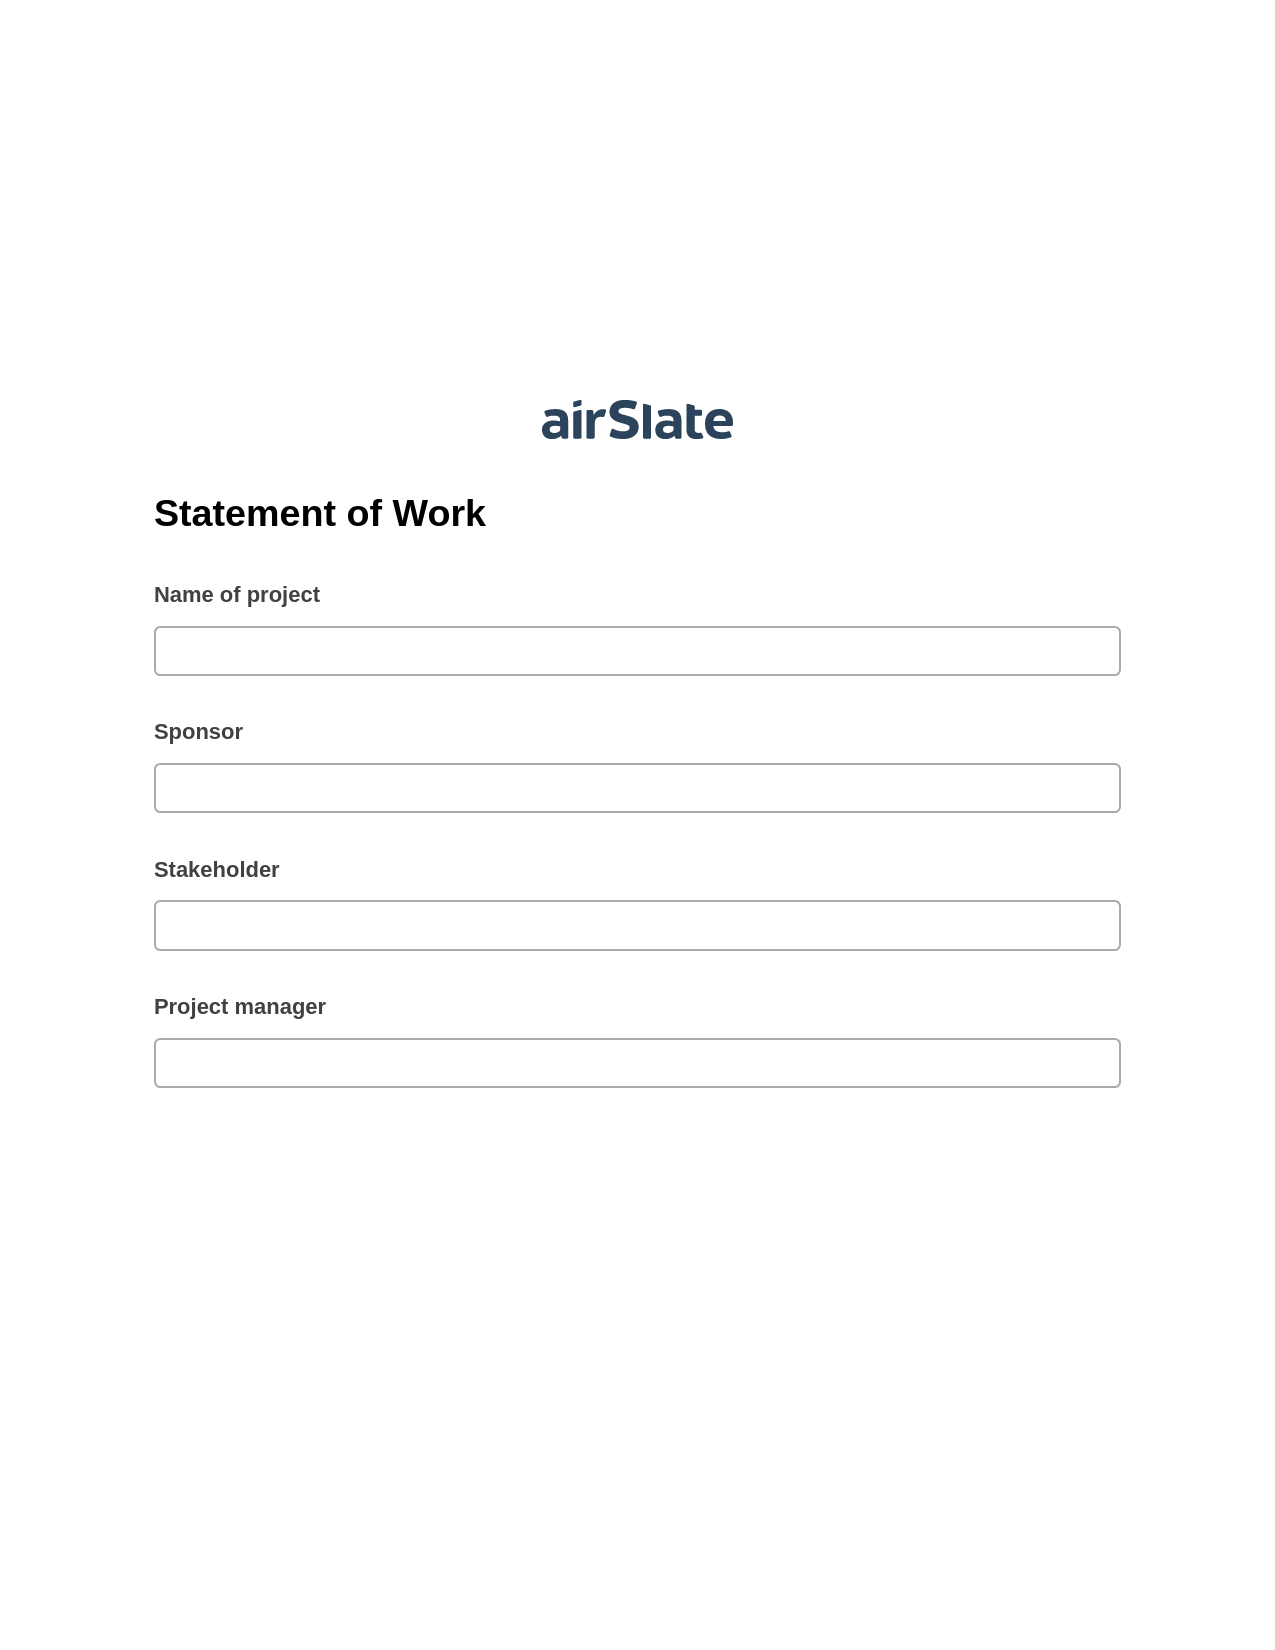 Multirole Statement of Work Pre-fill from Salesforce Record Bot, Remove Tags From Slate Bot, Export to Smartsheet